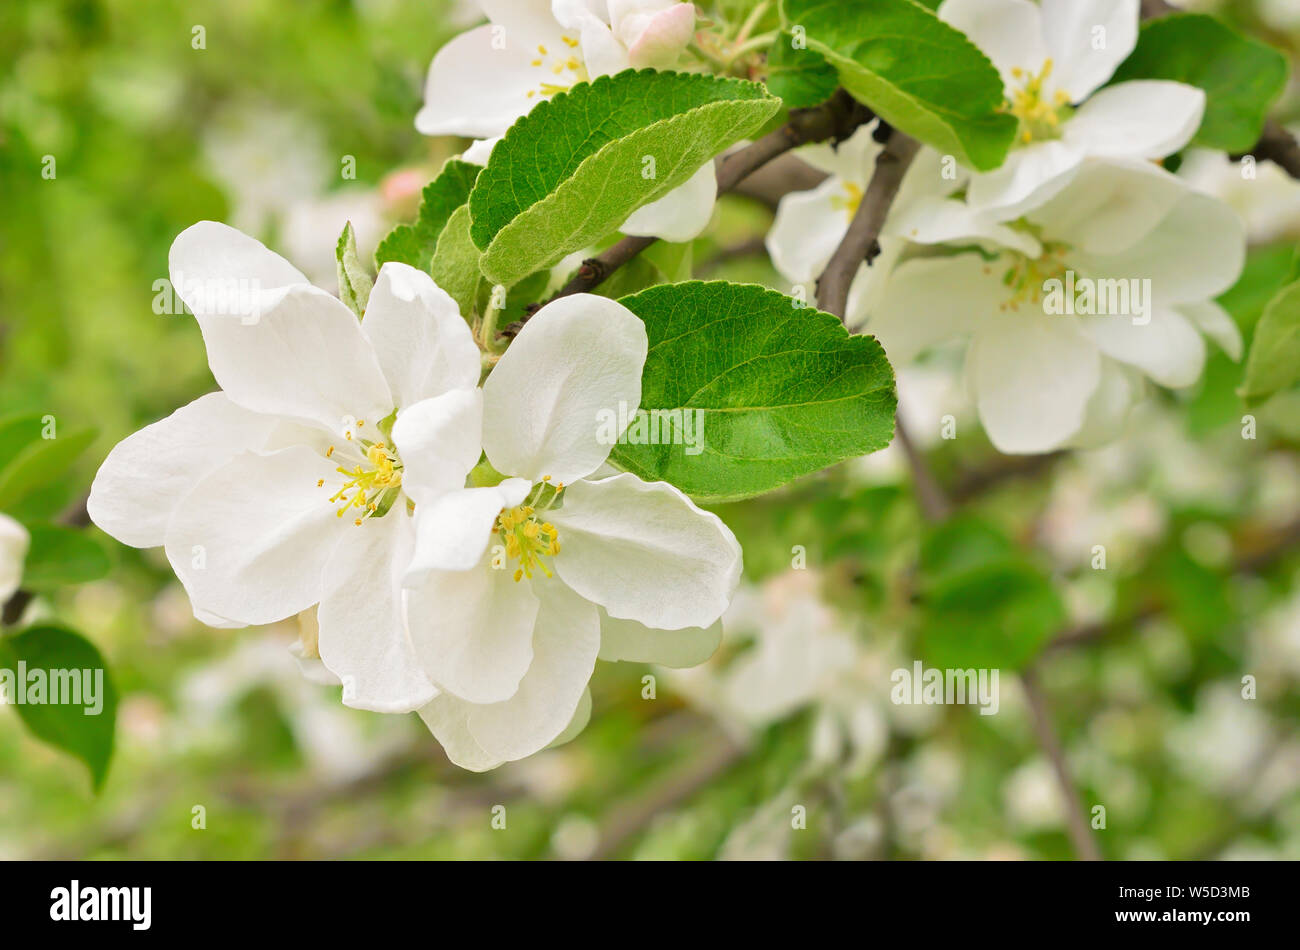 Blossoming of apple trees Stock Photo